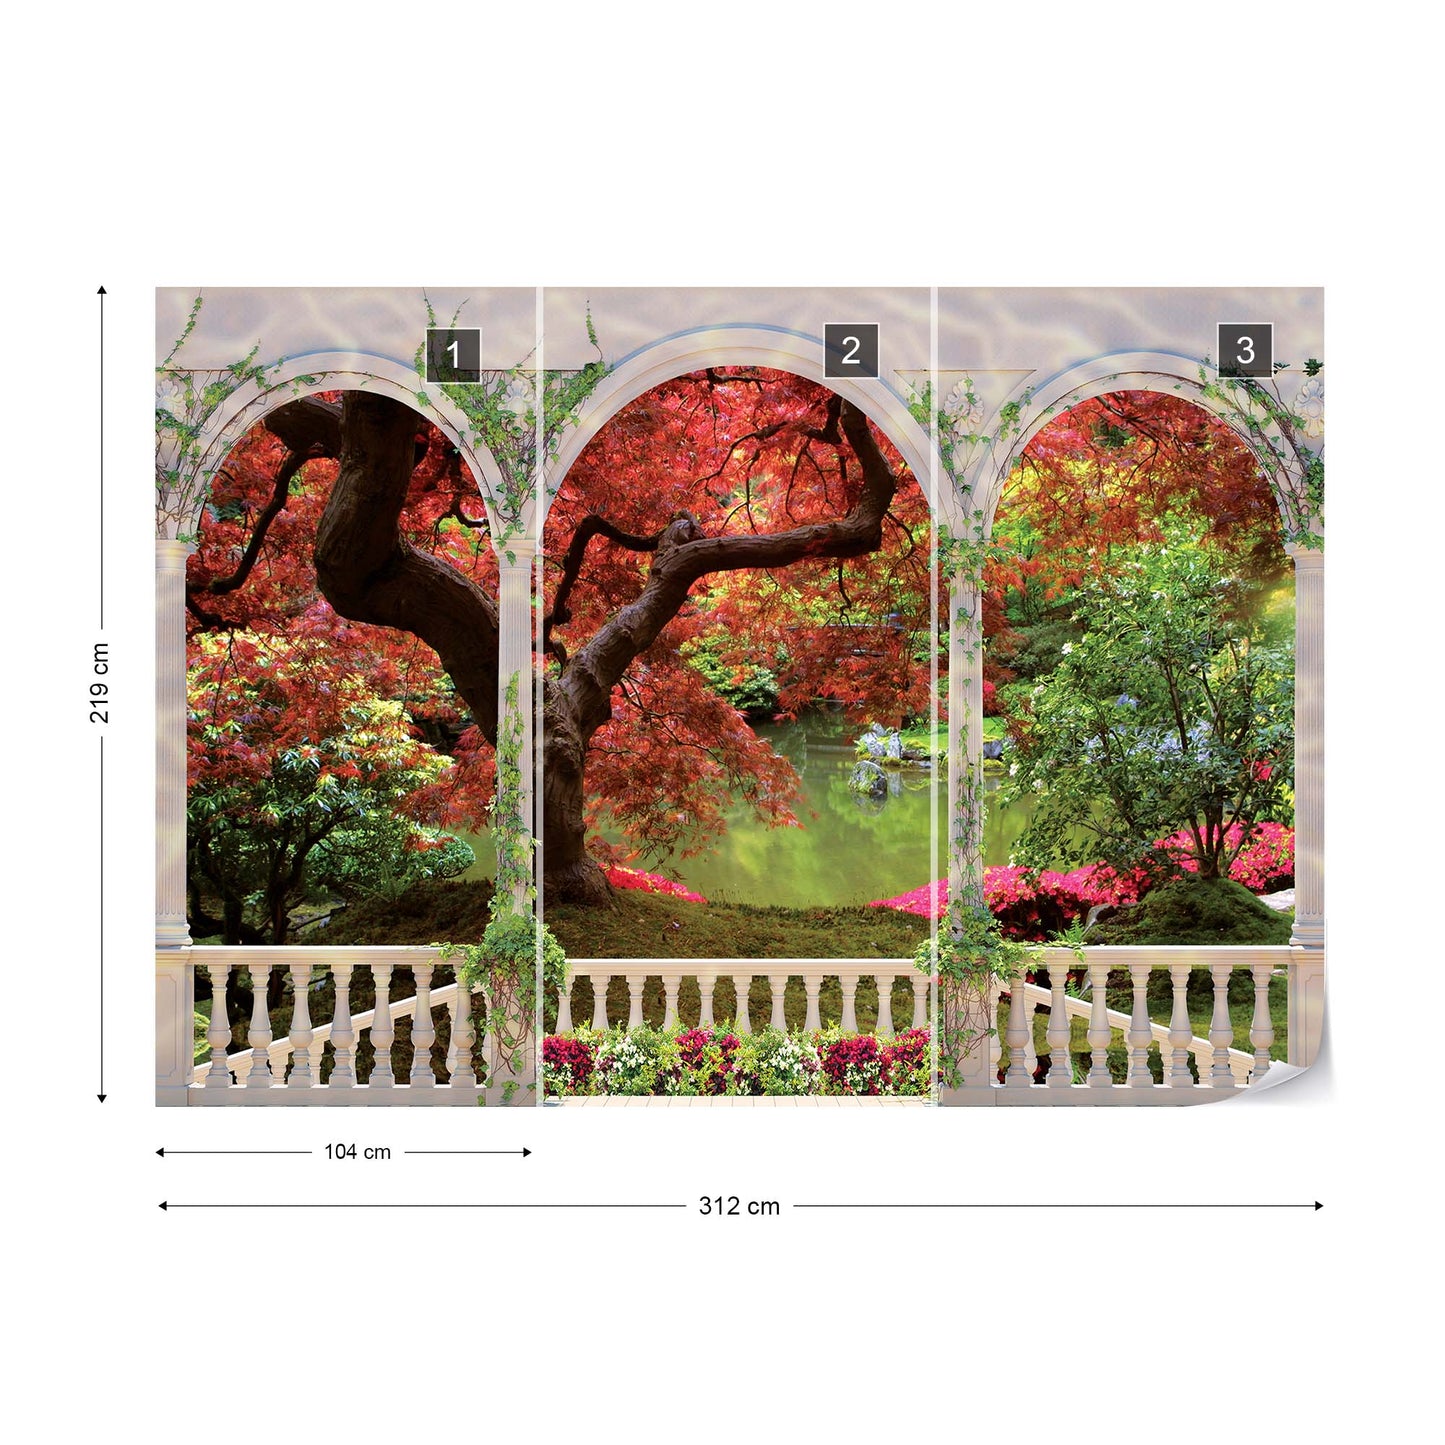 Forest View Through Arches Photo Wallpaper Wall Mural - USTAD HOME